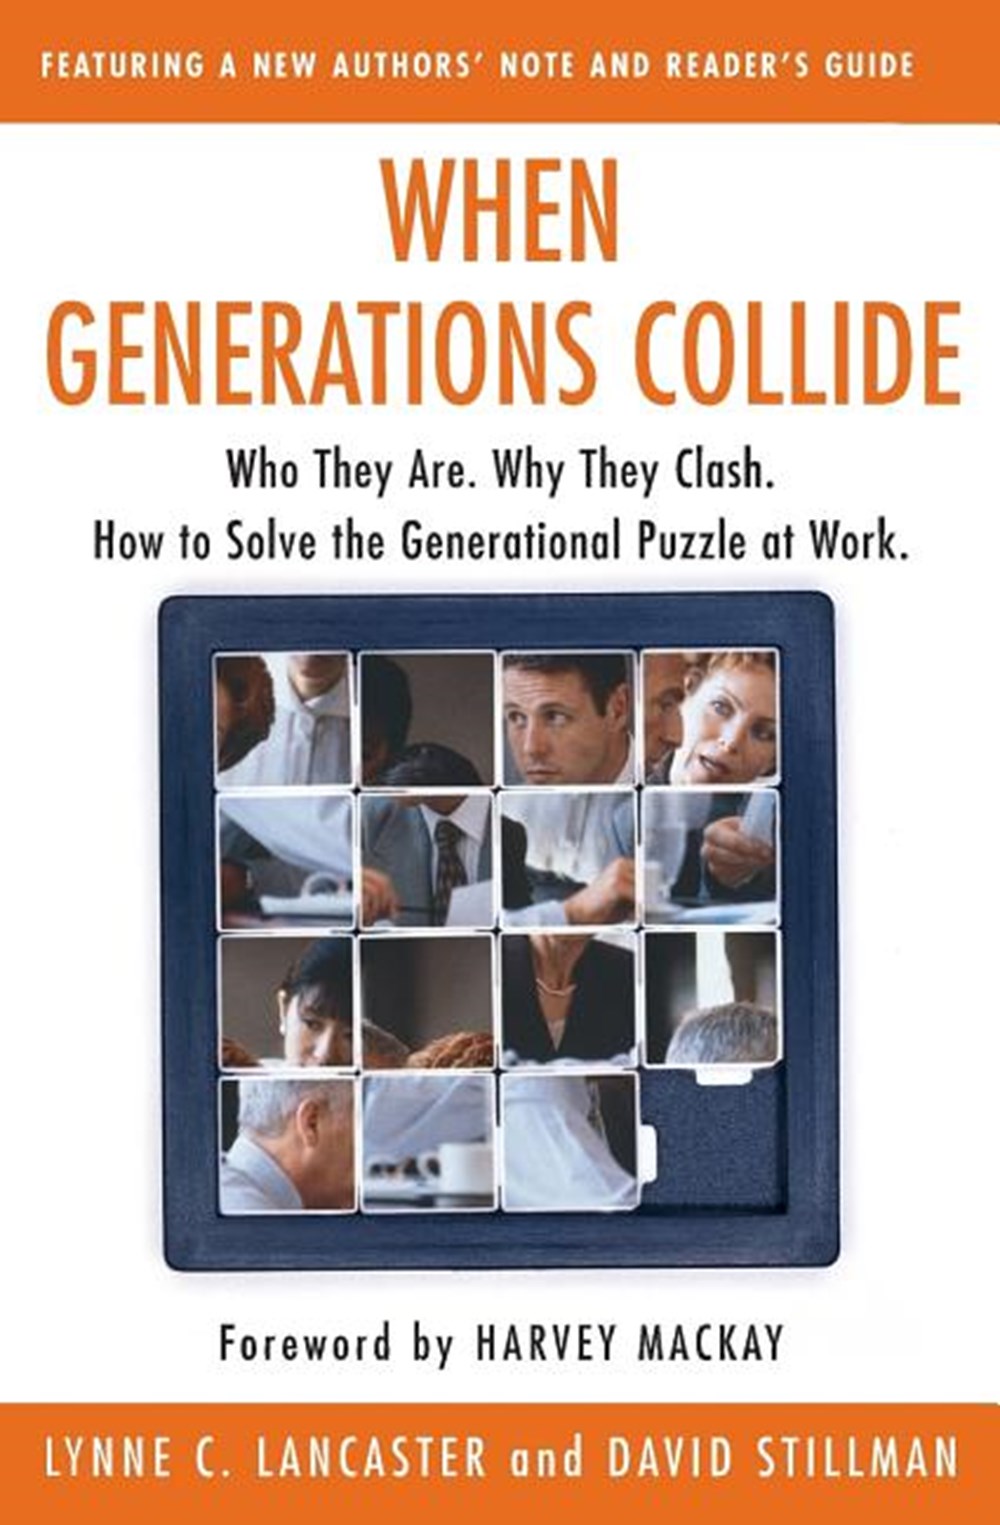 When Generations Collide Who They Are. Why They Clash. How to Solve the Generational Puzzle at Work